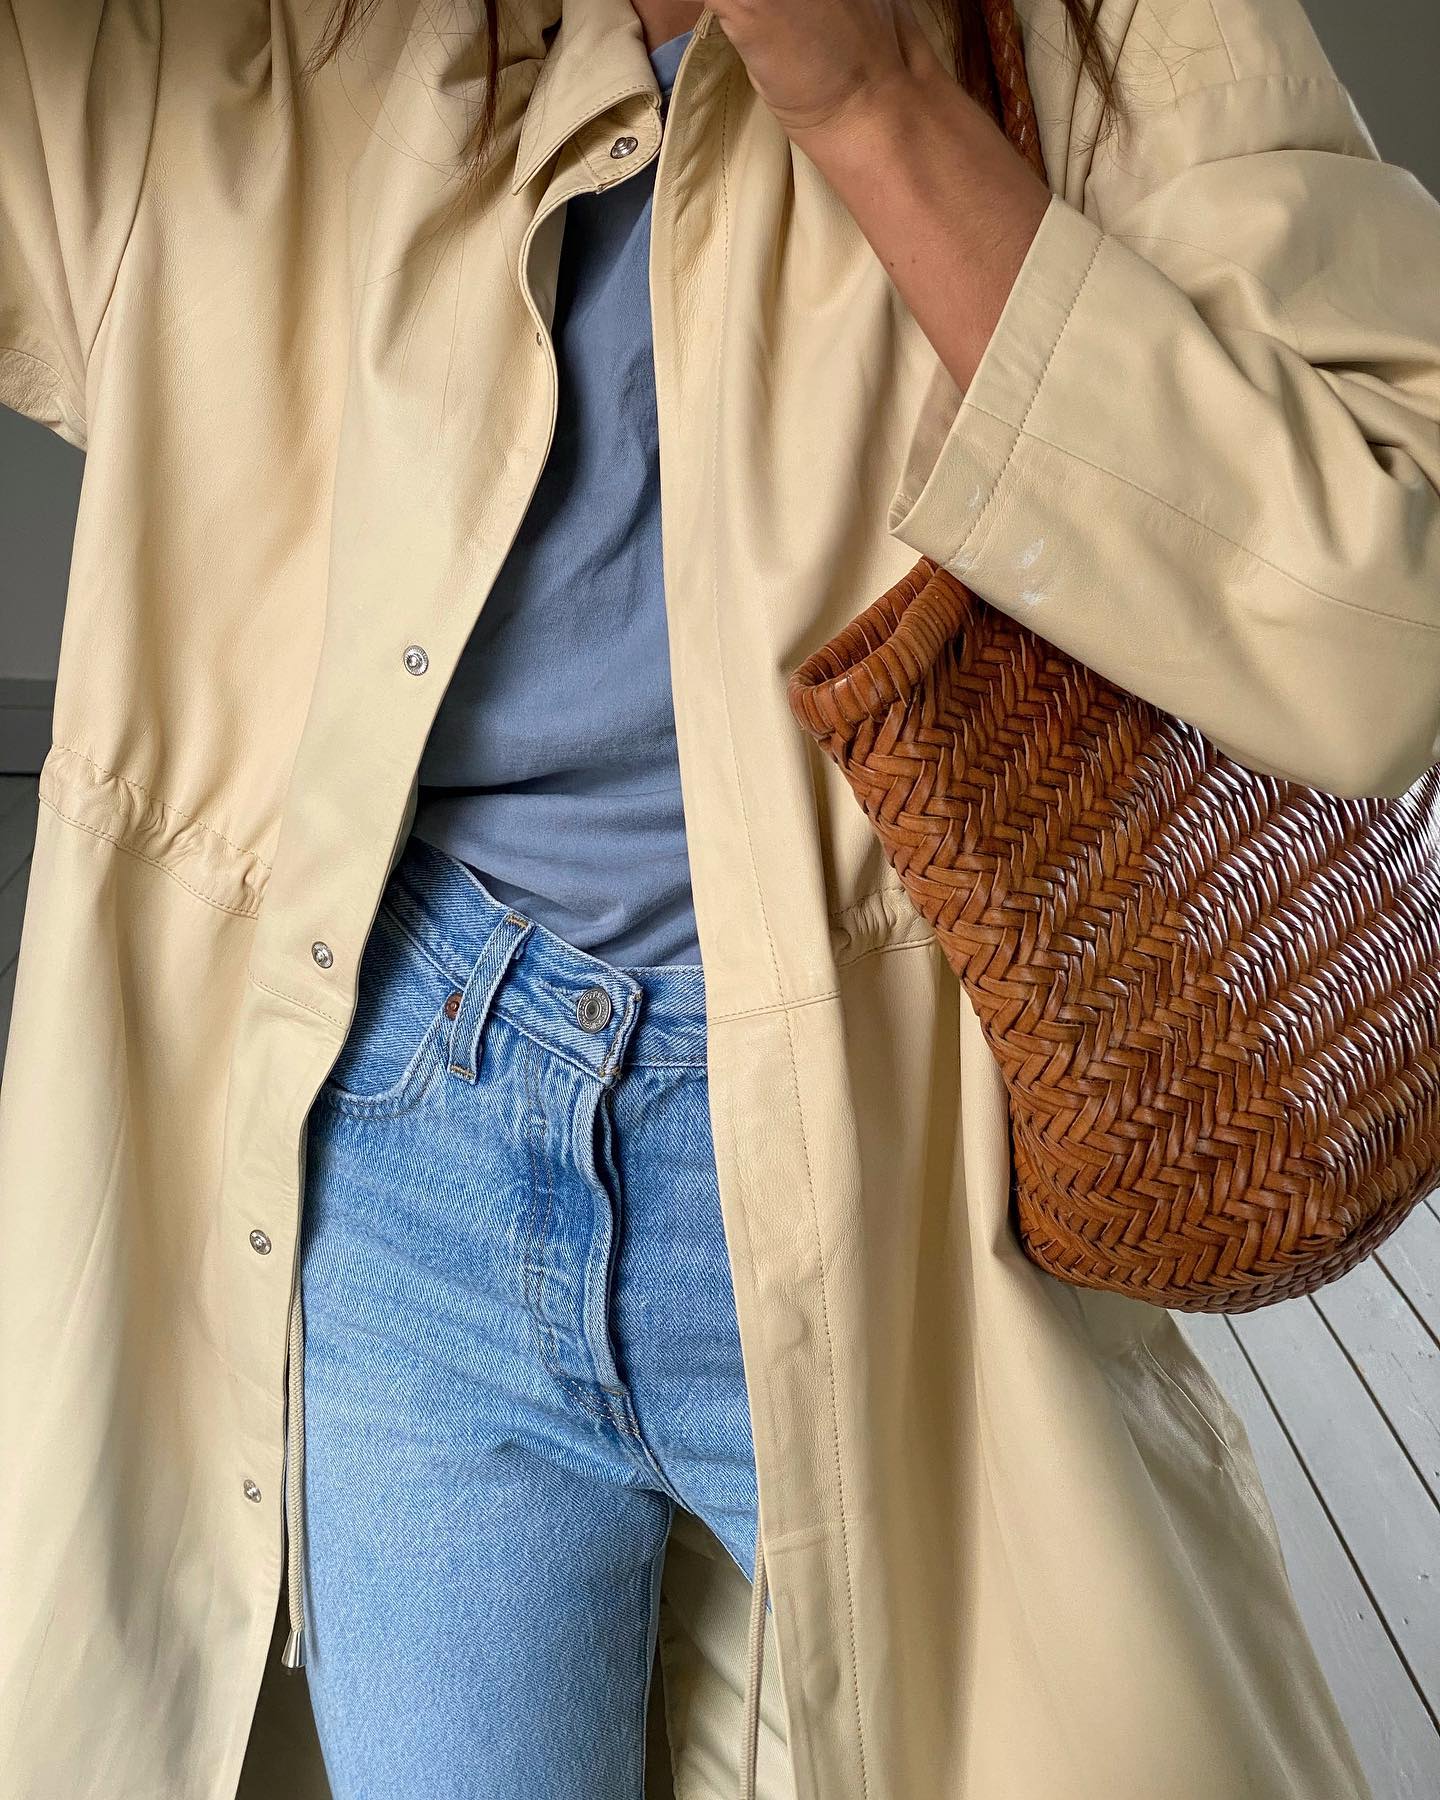 close-up mirror selfie of Marianne Smyth wearing a butter-yellow jacket, gray tee, high-waisted jeans, and a Dragon Diffusion woven leather bag